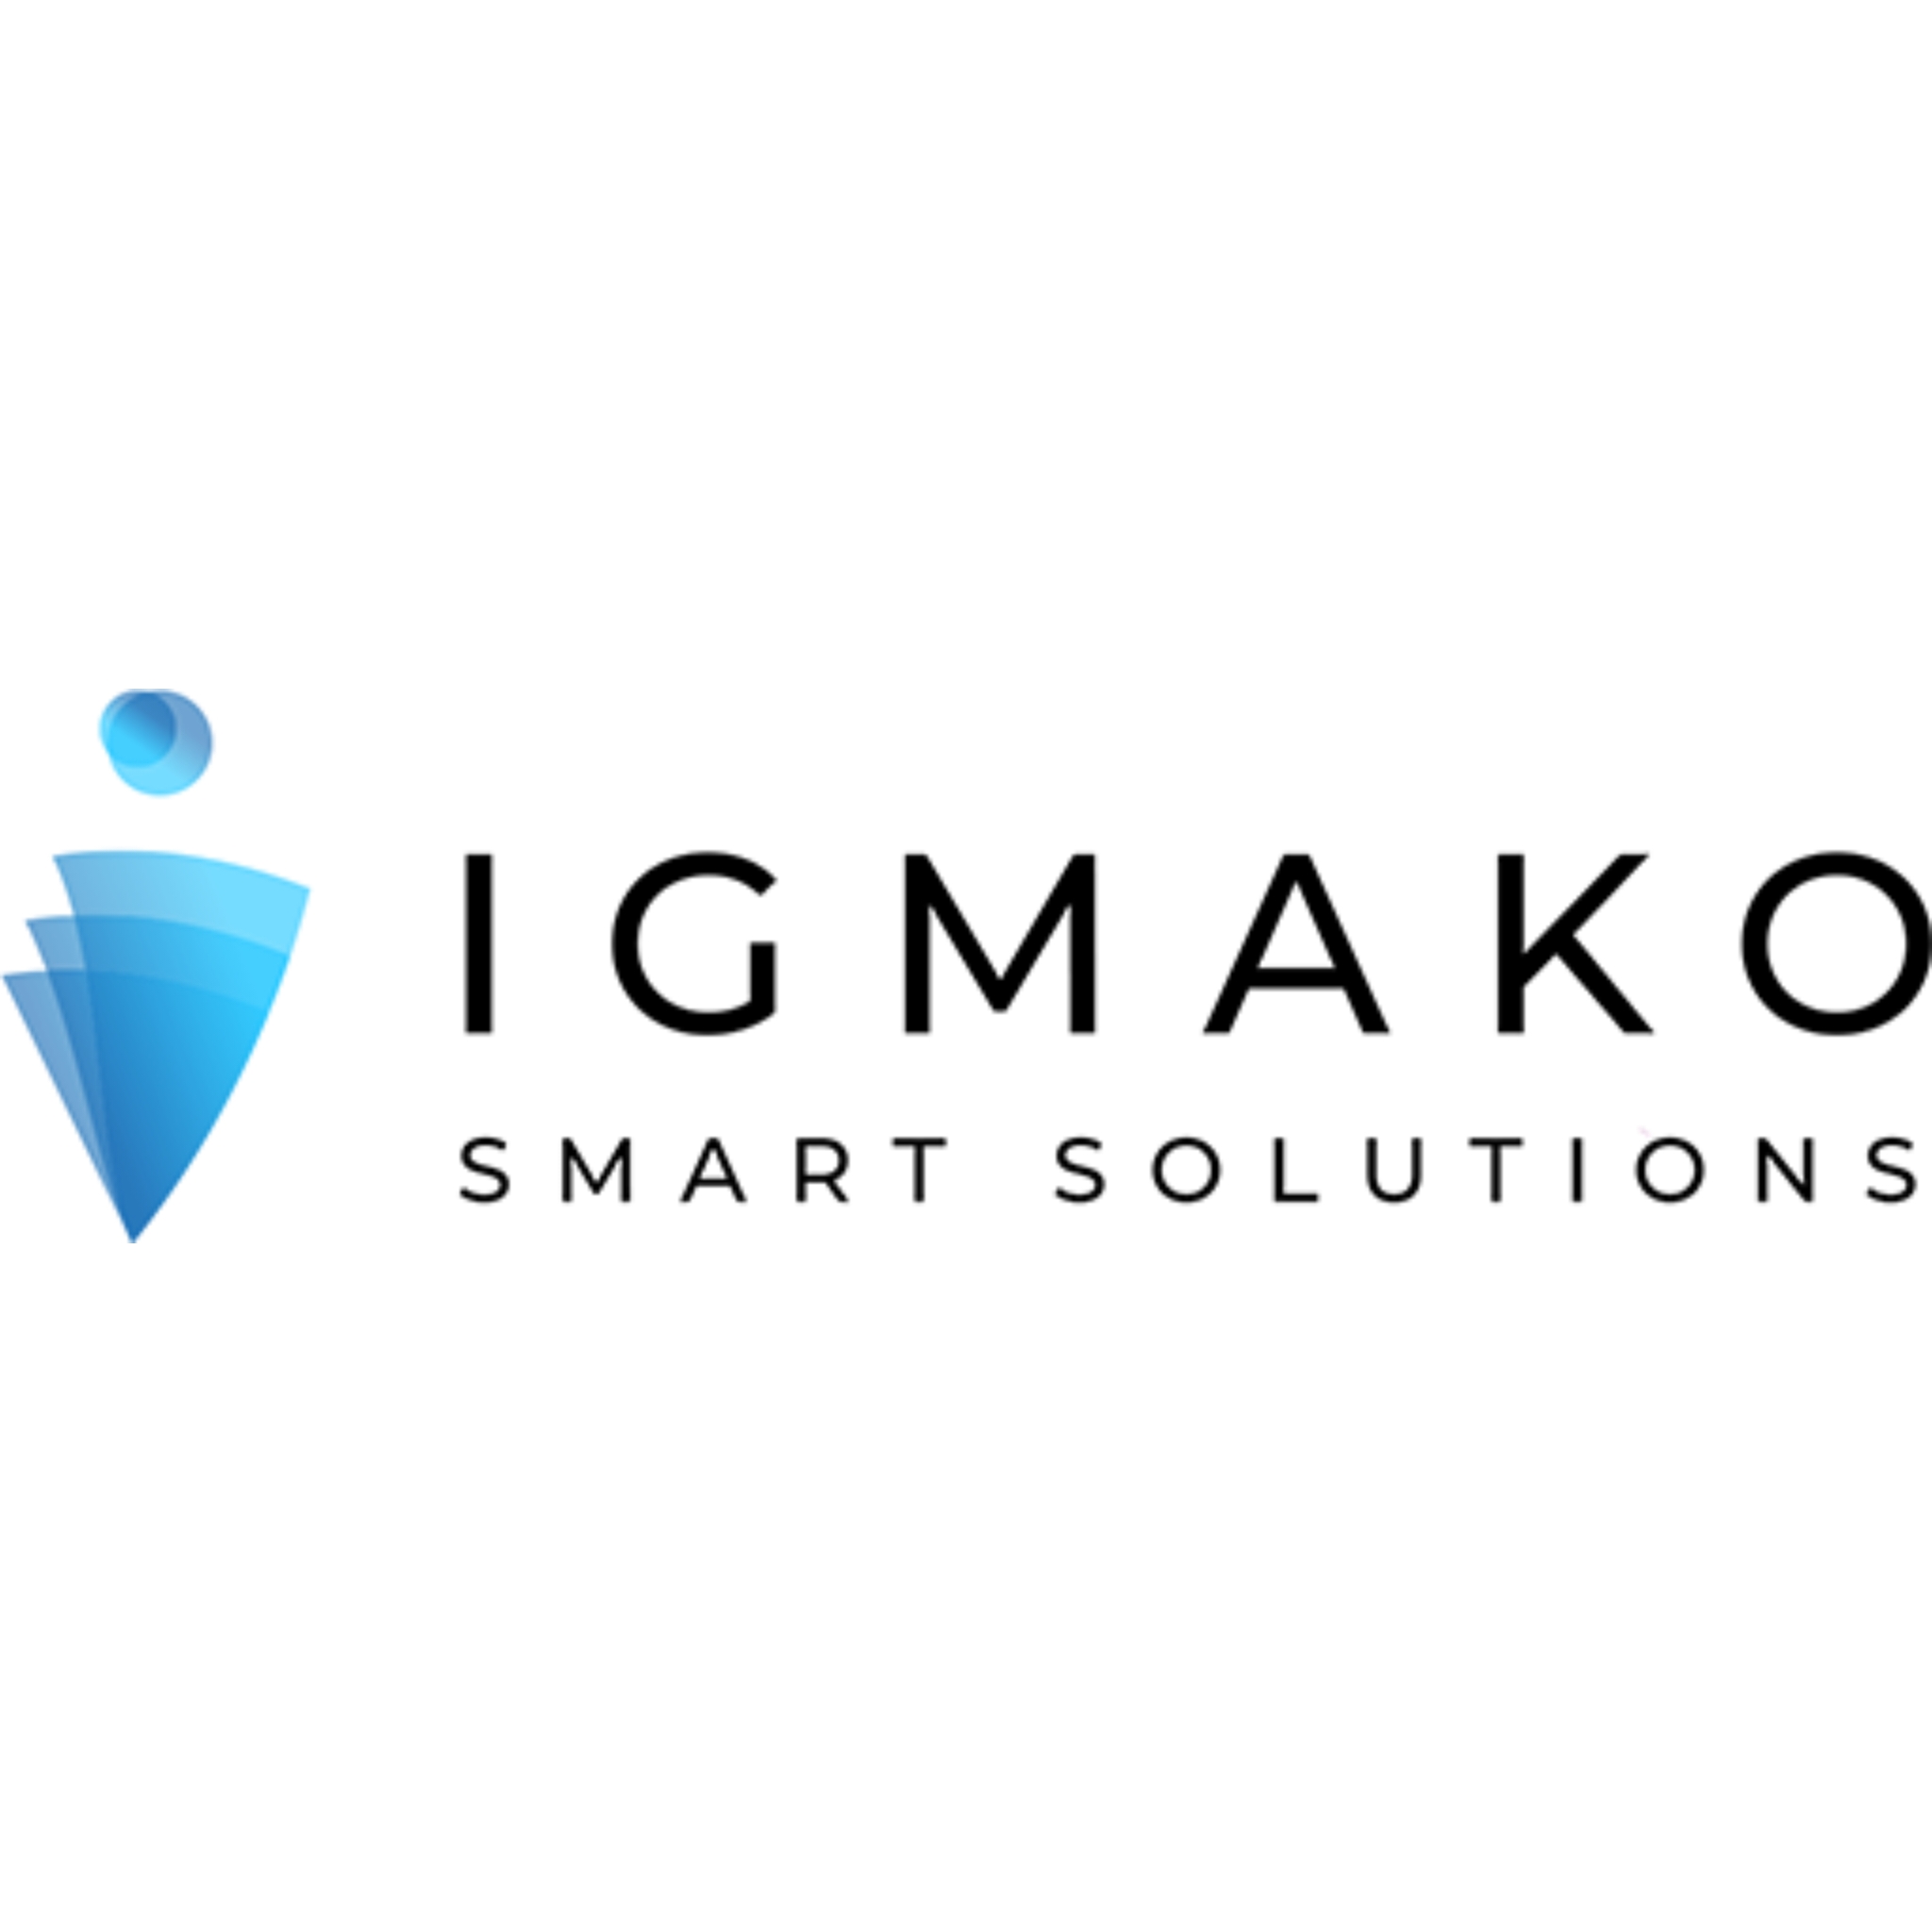 Welcome our newest member Igmako Smart Solutions